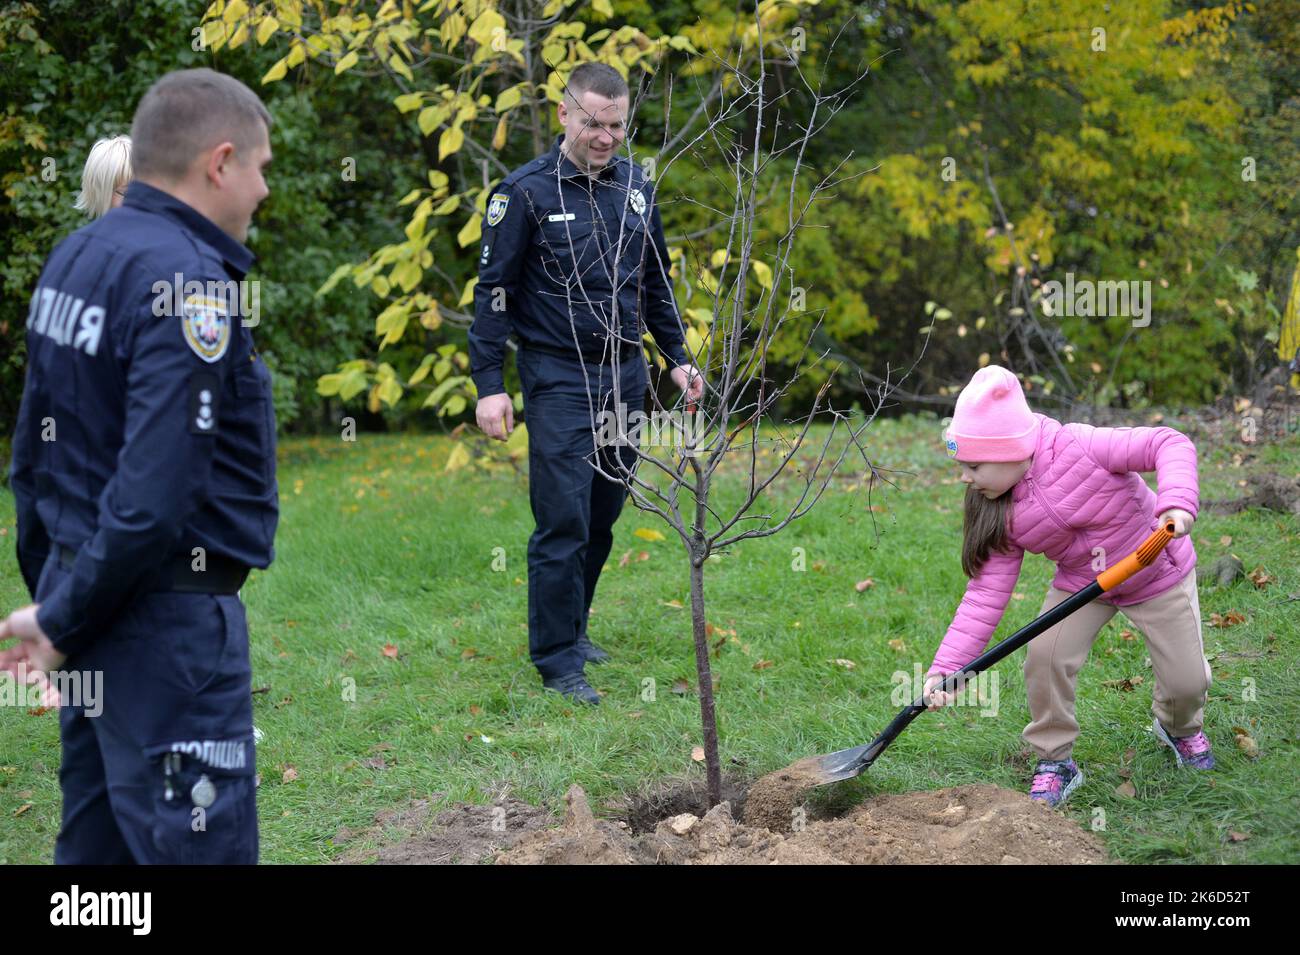 KYIV, UKRAINE - OCTOBER 11, 2022 - Policemen and a girl take part in the All-Ukrainain planting of the Alley of Defenders of Ukraine in the National Botanical Garden of the National Academy of Sciences of Ukraine, Kyiv, capital of Ukraine. Stock Photo